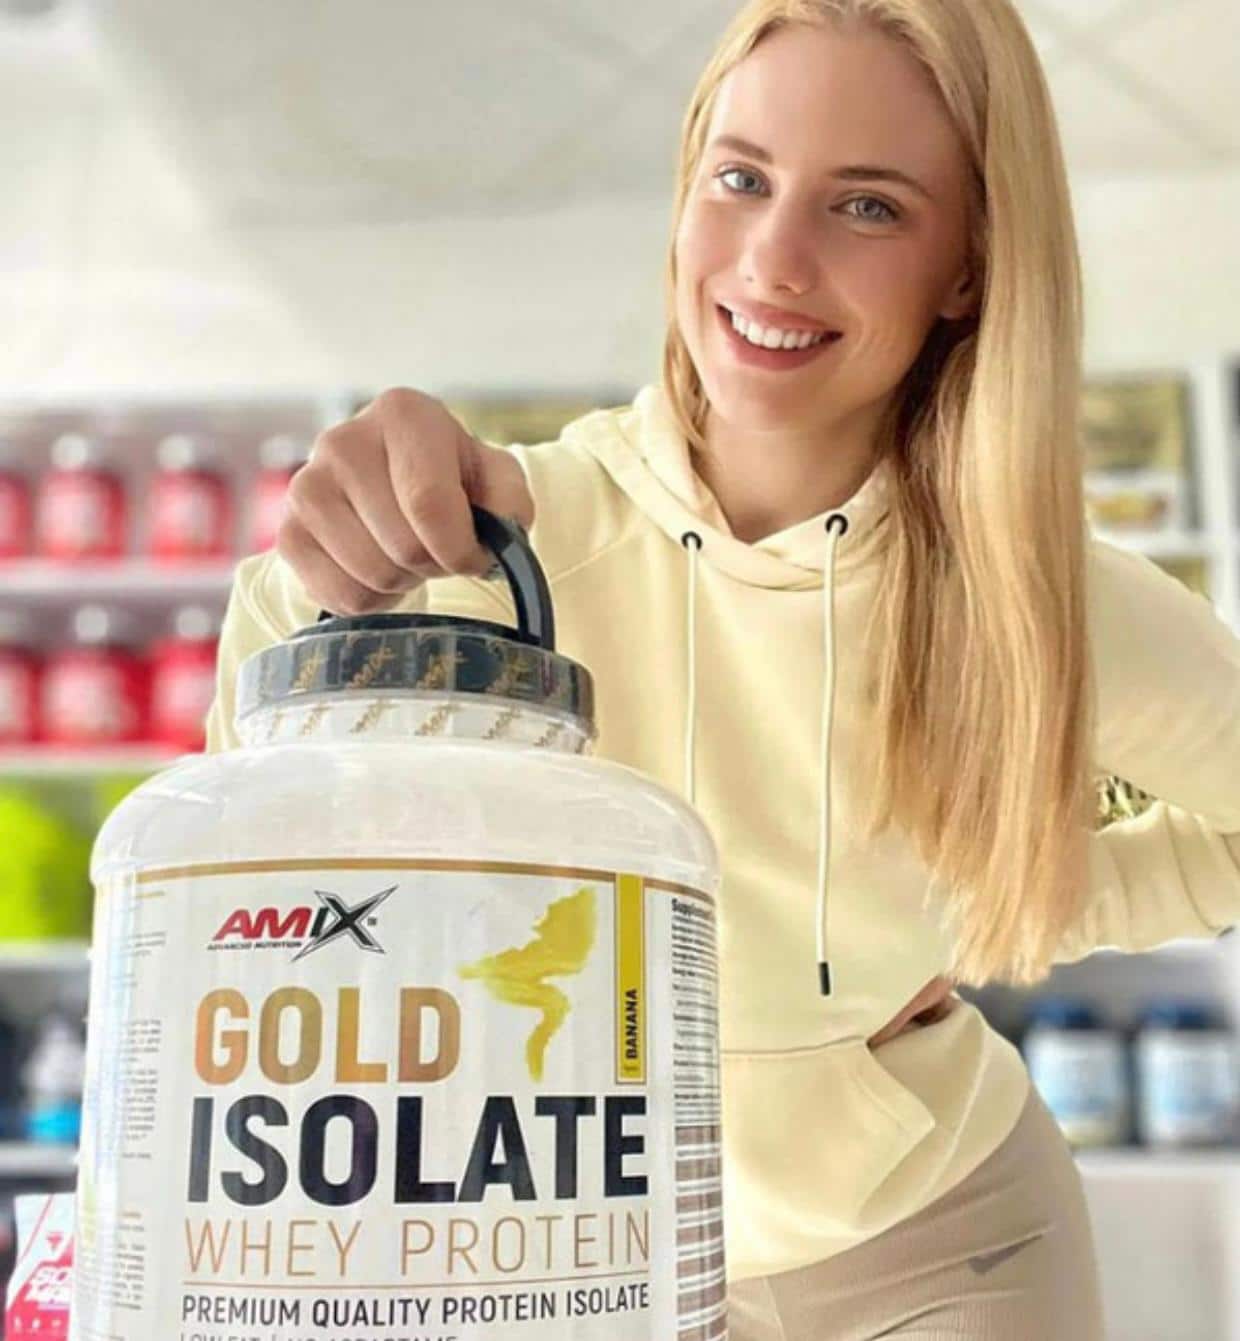 Gold Whey Isolate